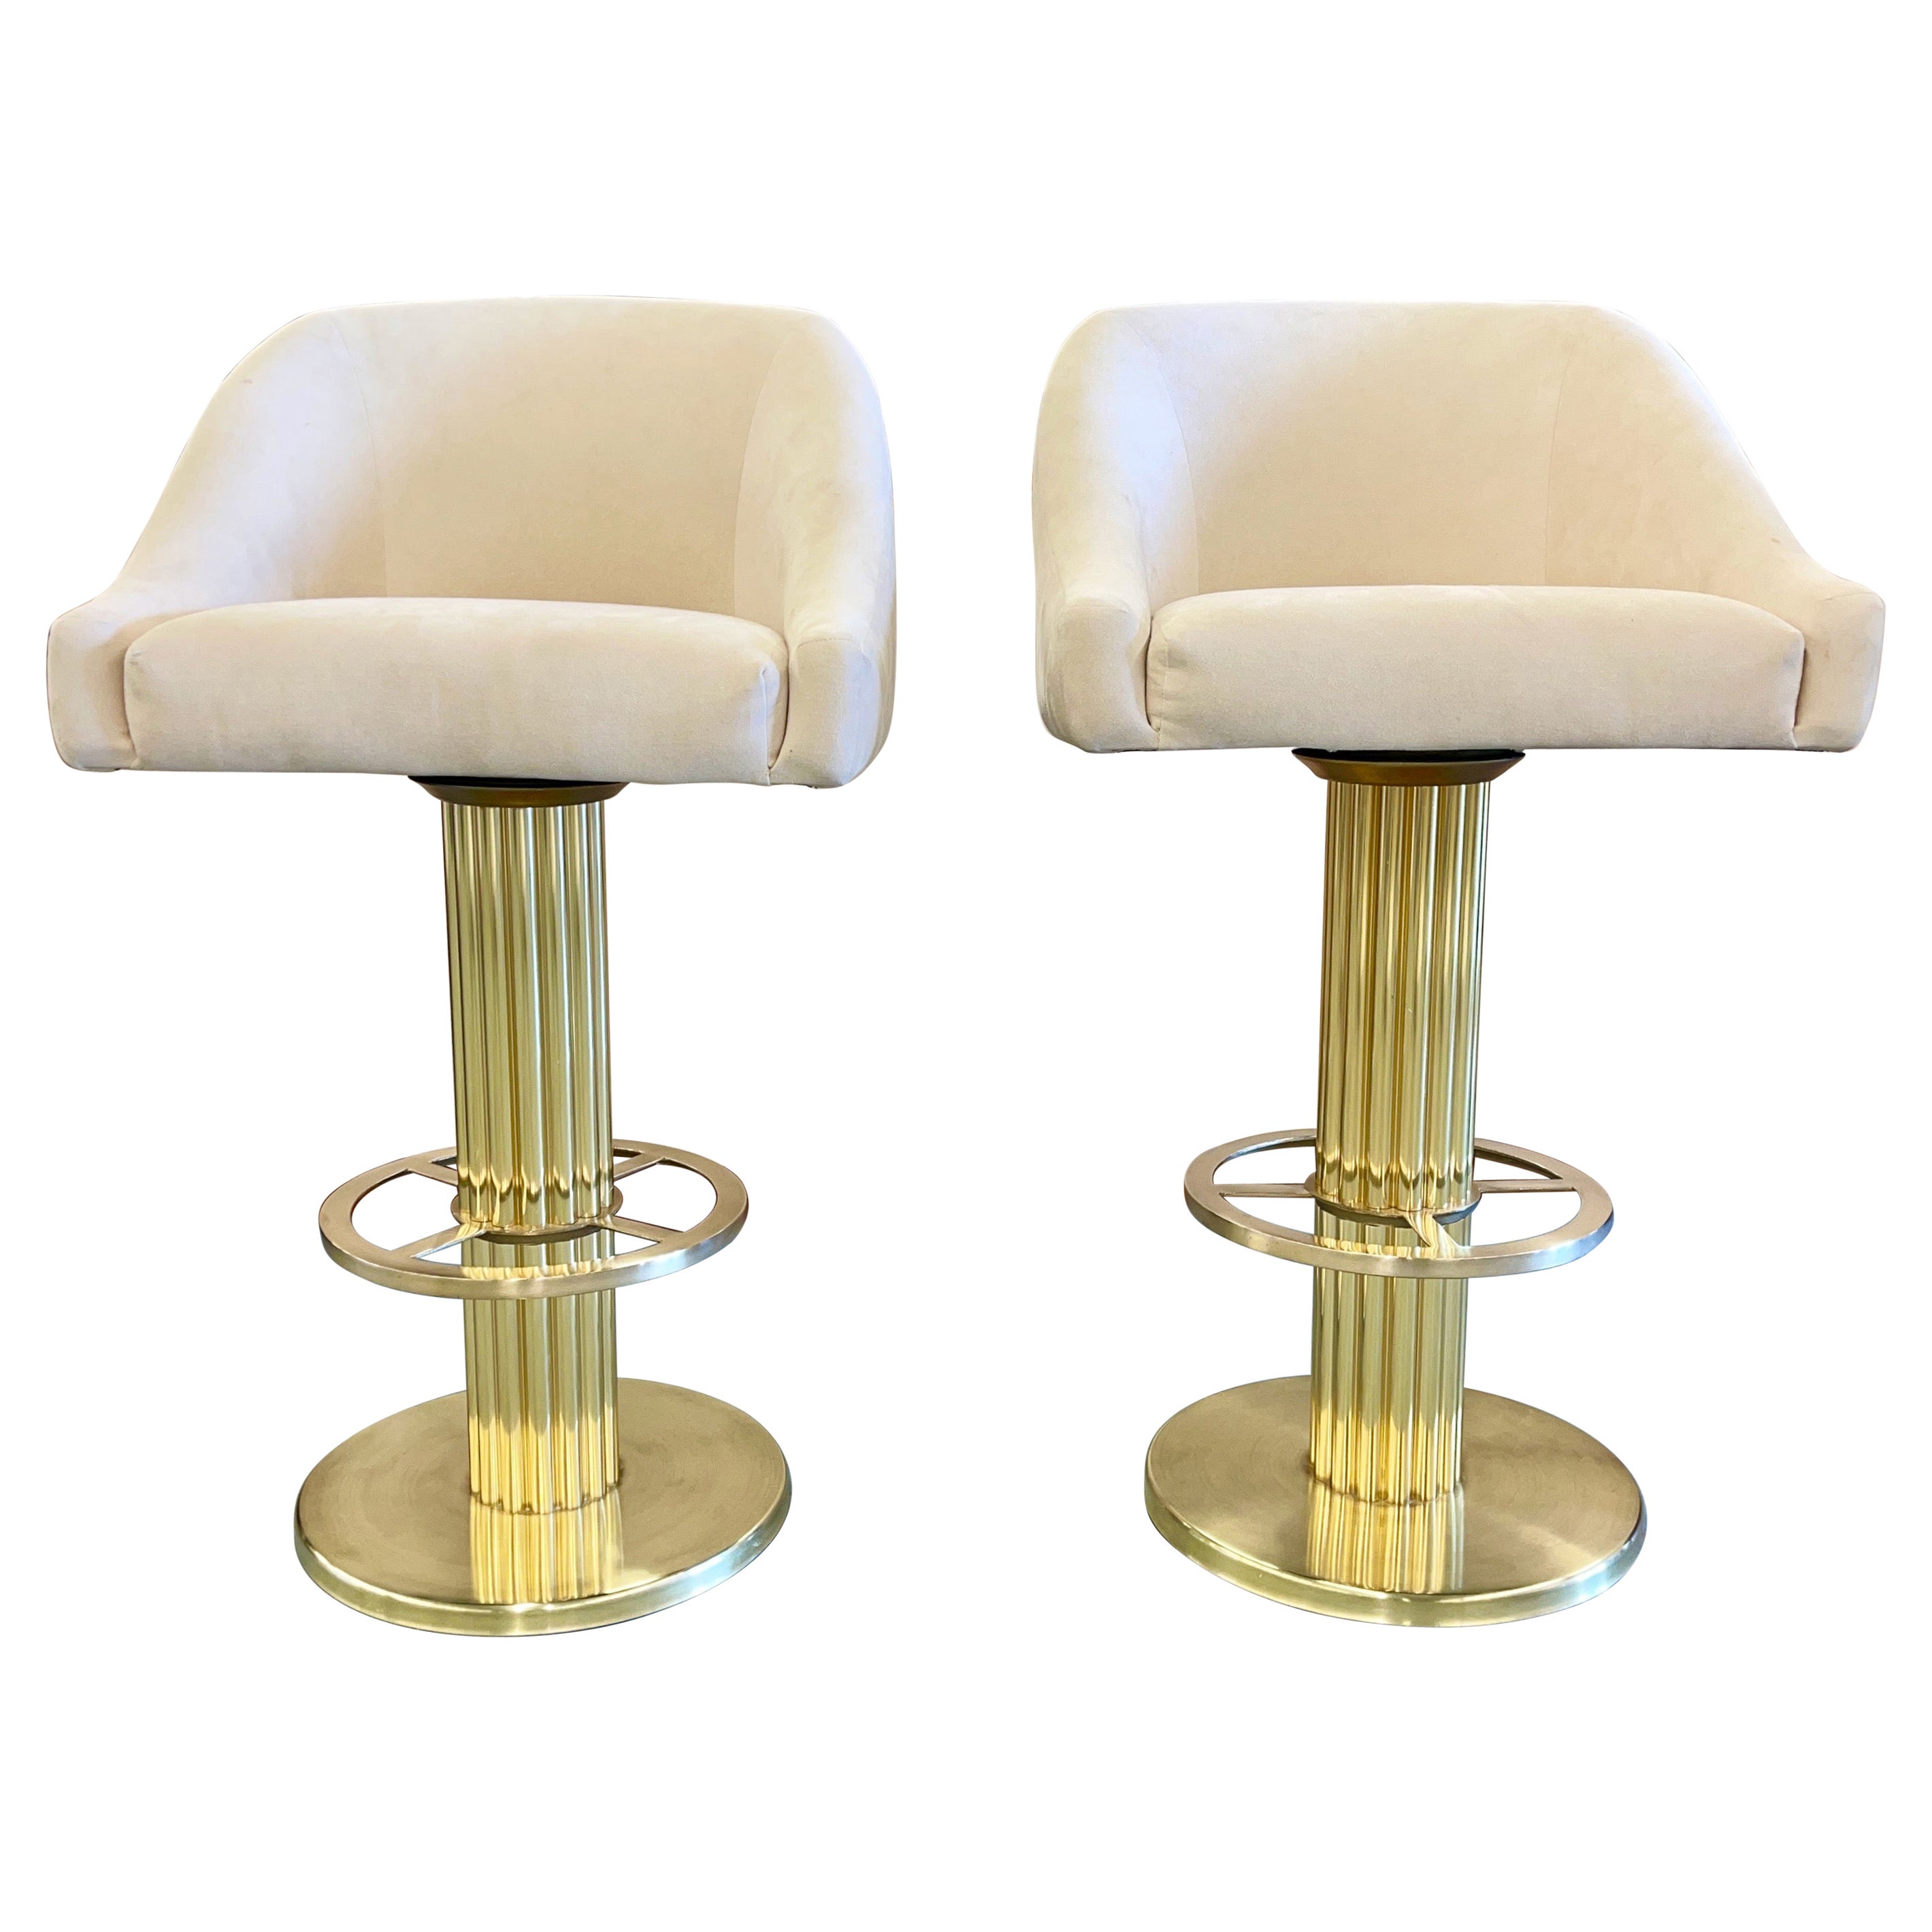 Pair of Design for Leisure Polished Brass Bar Stools